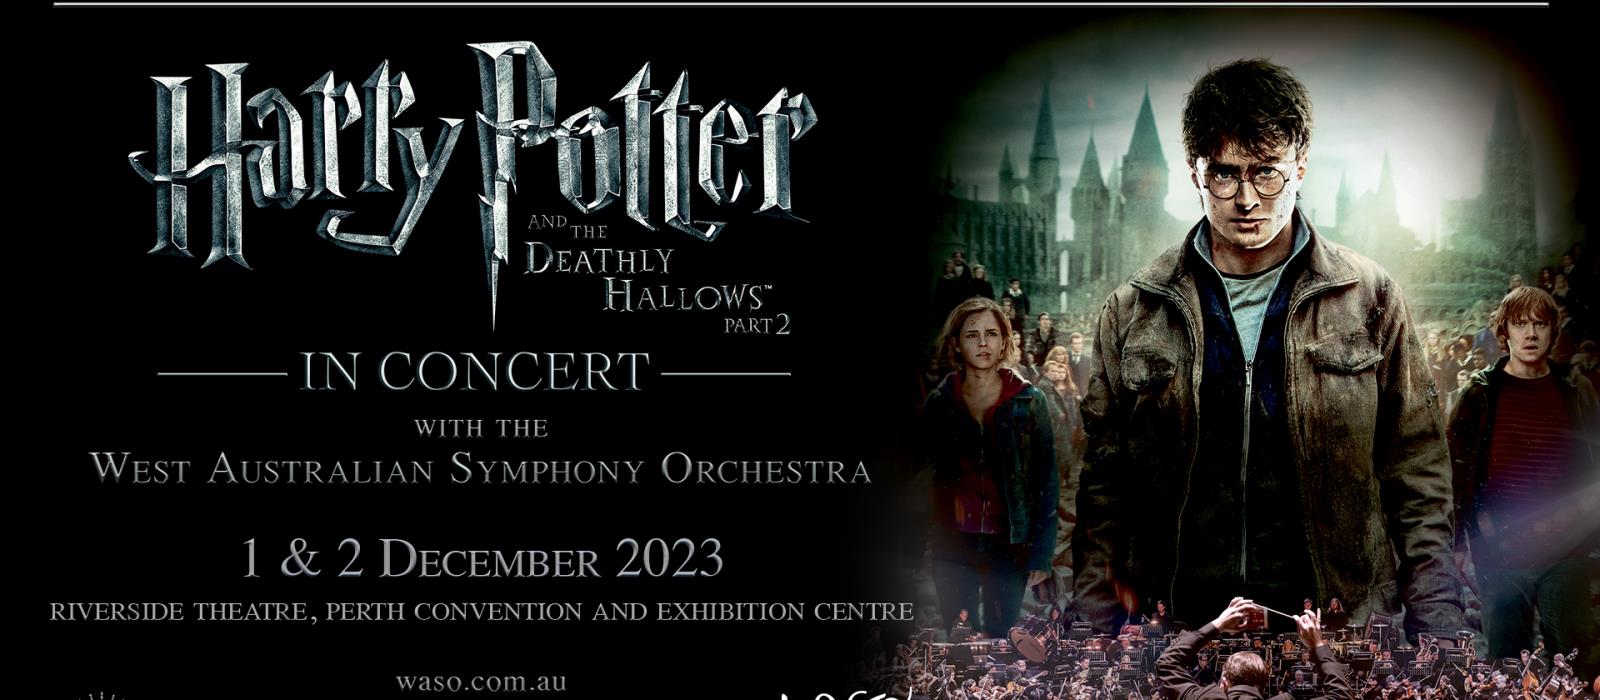 Harry Potter and the Deathly Hallows™: Part 2 in Concert